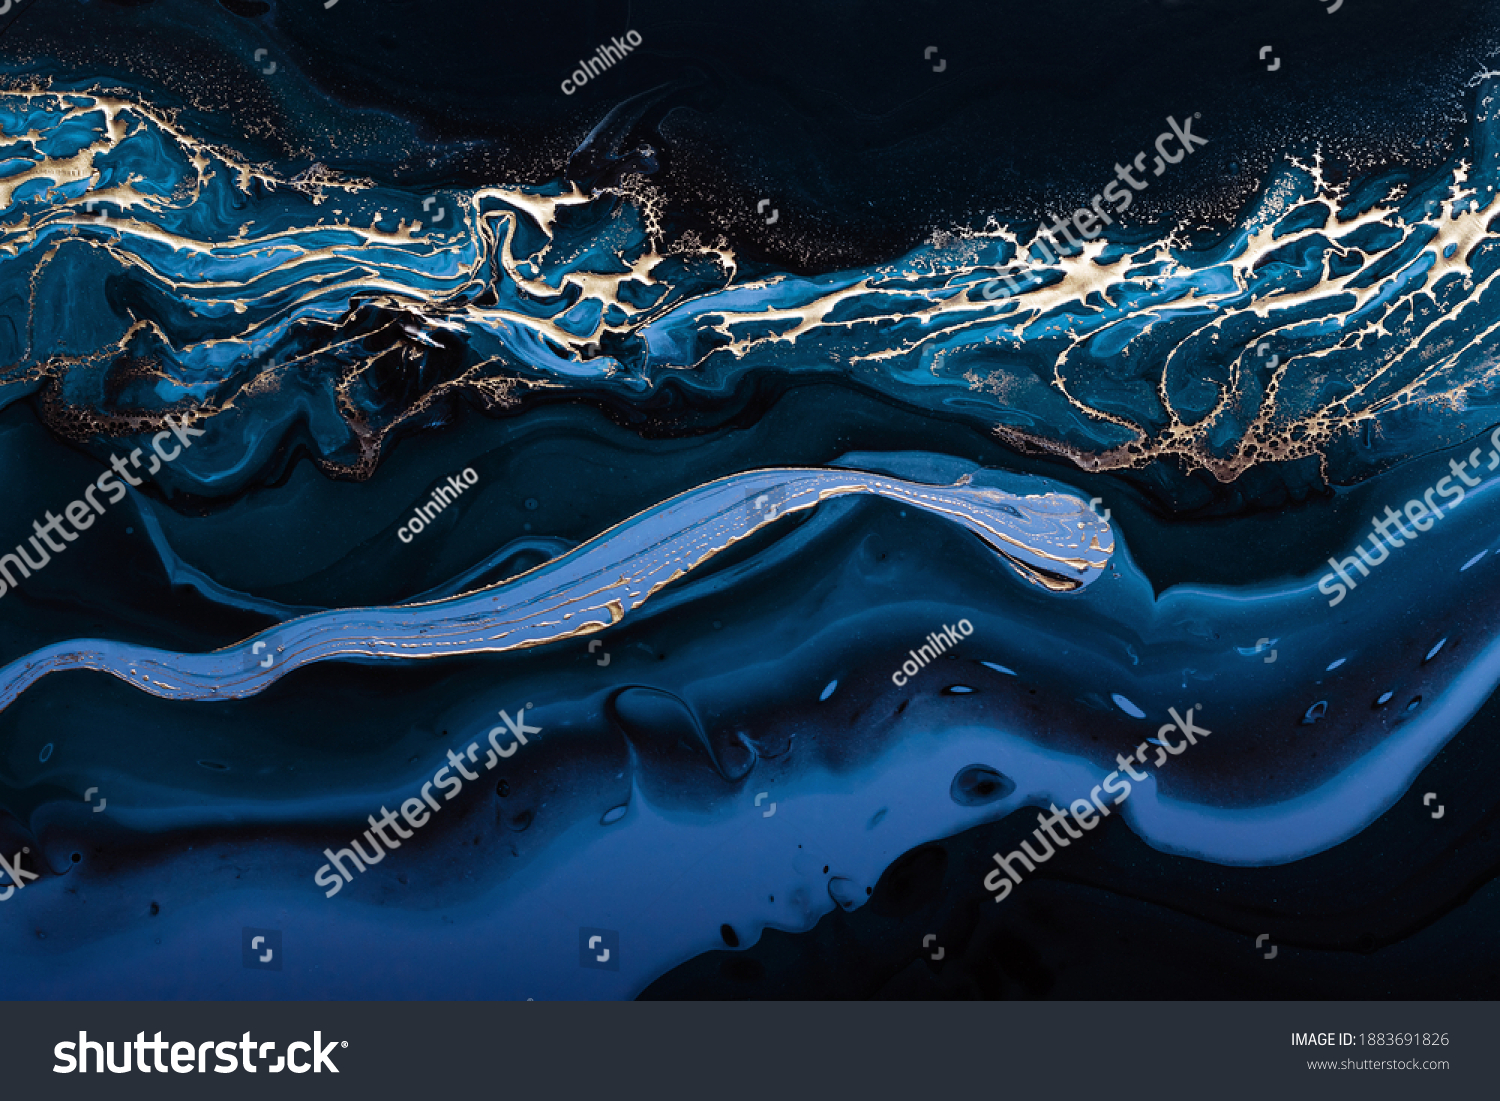 Fluid Art. Liquid Metallic Gold in abstract blue wave. Marble effect background or texture. #1883691826